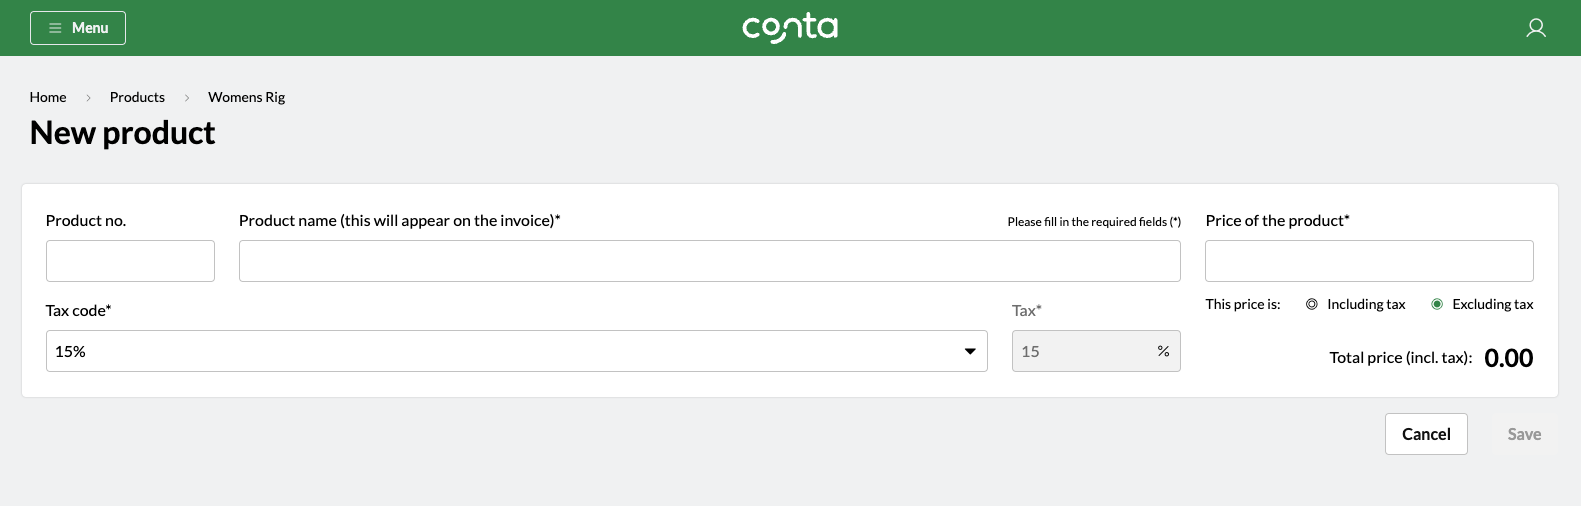 The new product-page, where you can enter product details and save them to Conta